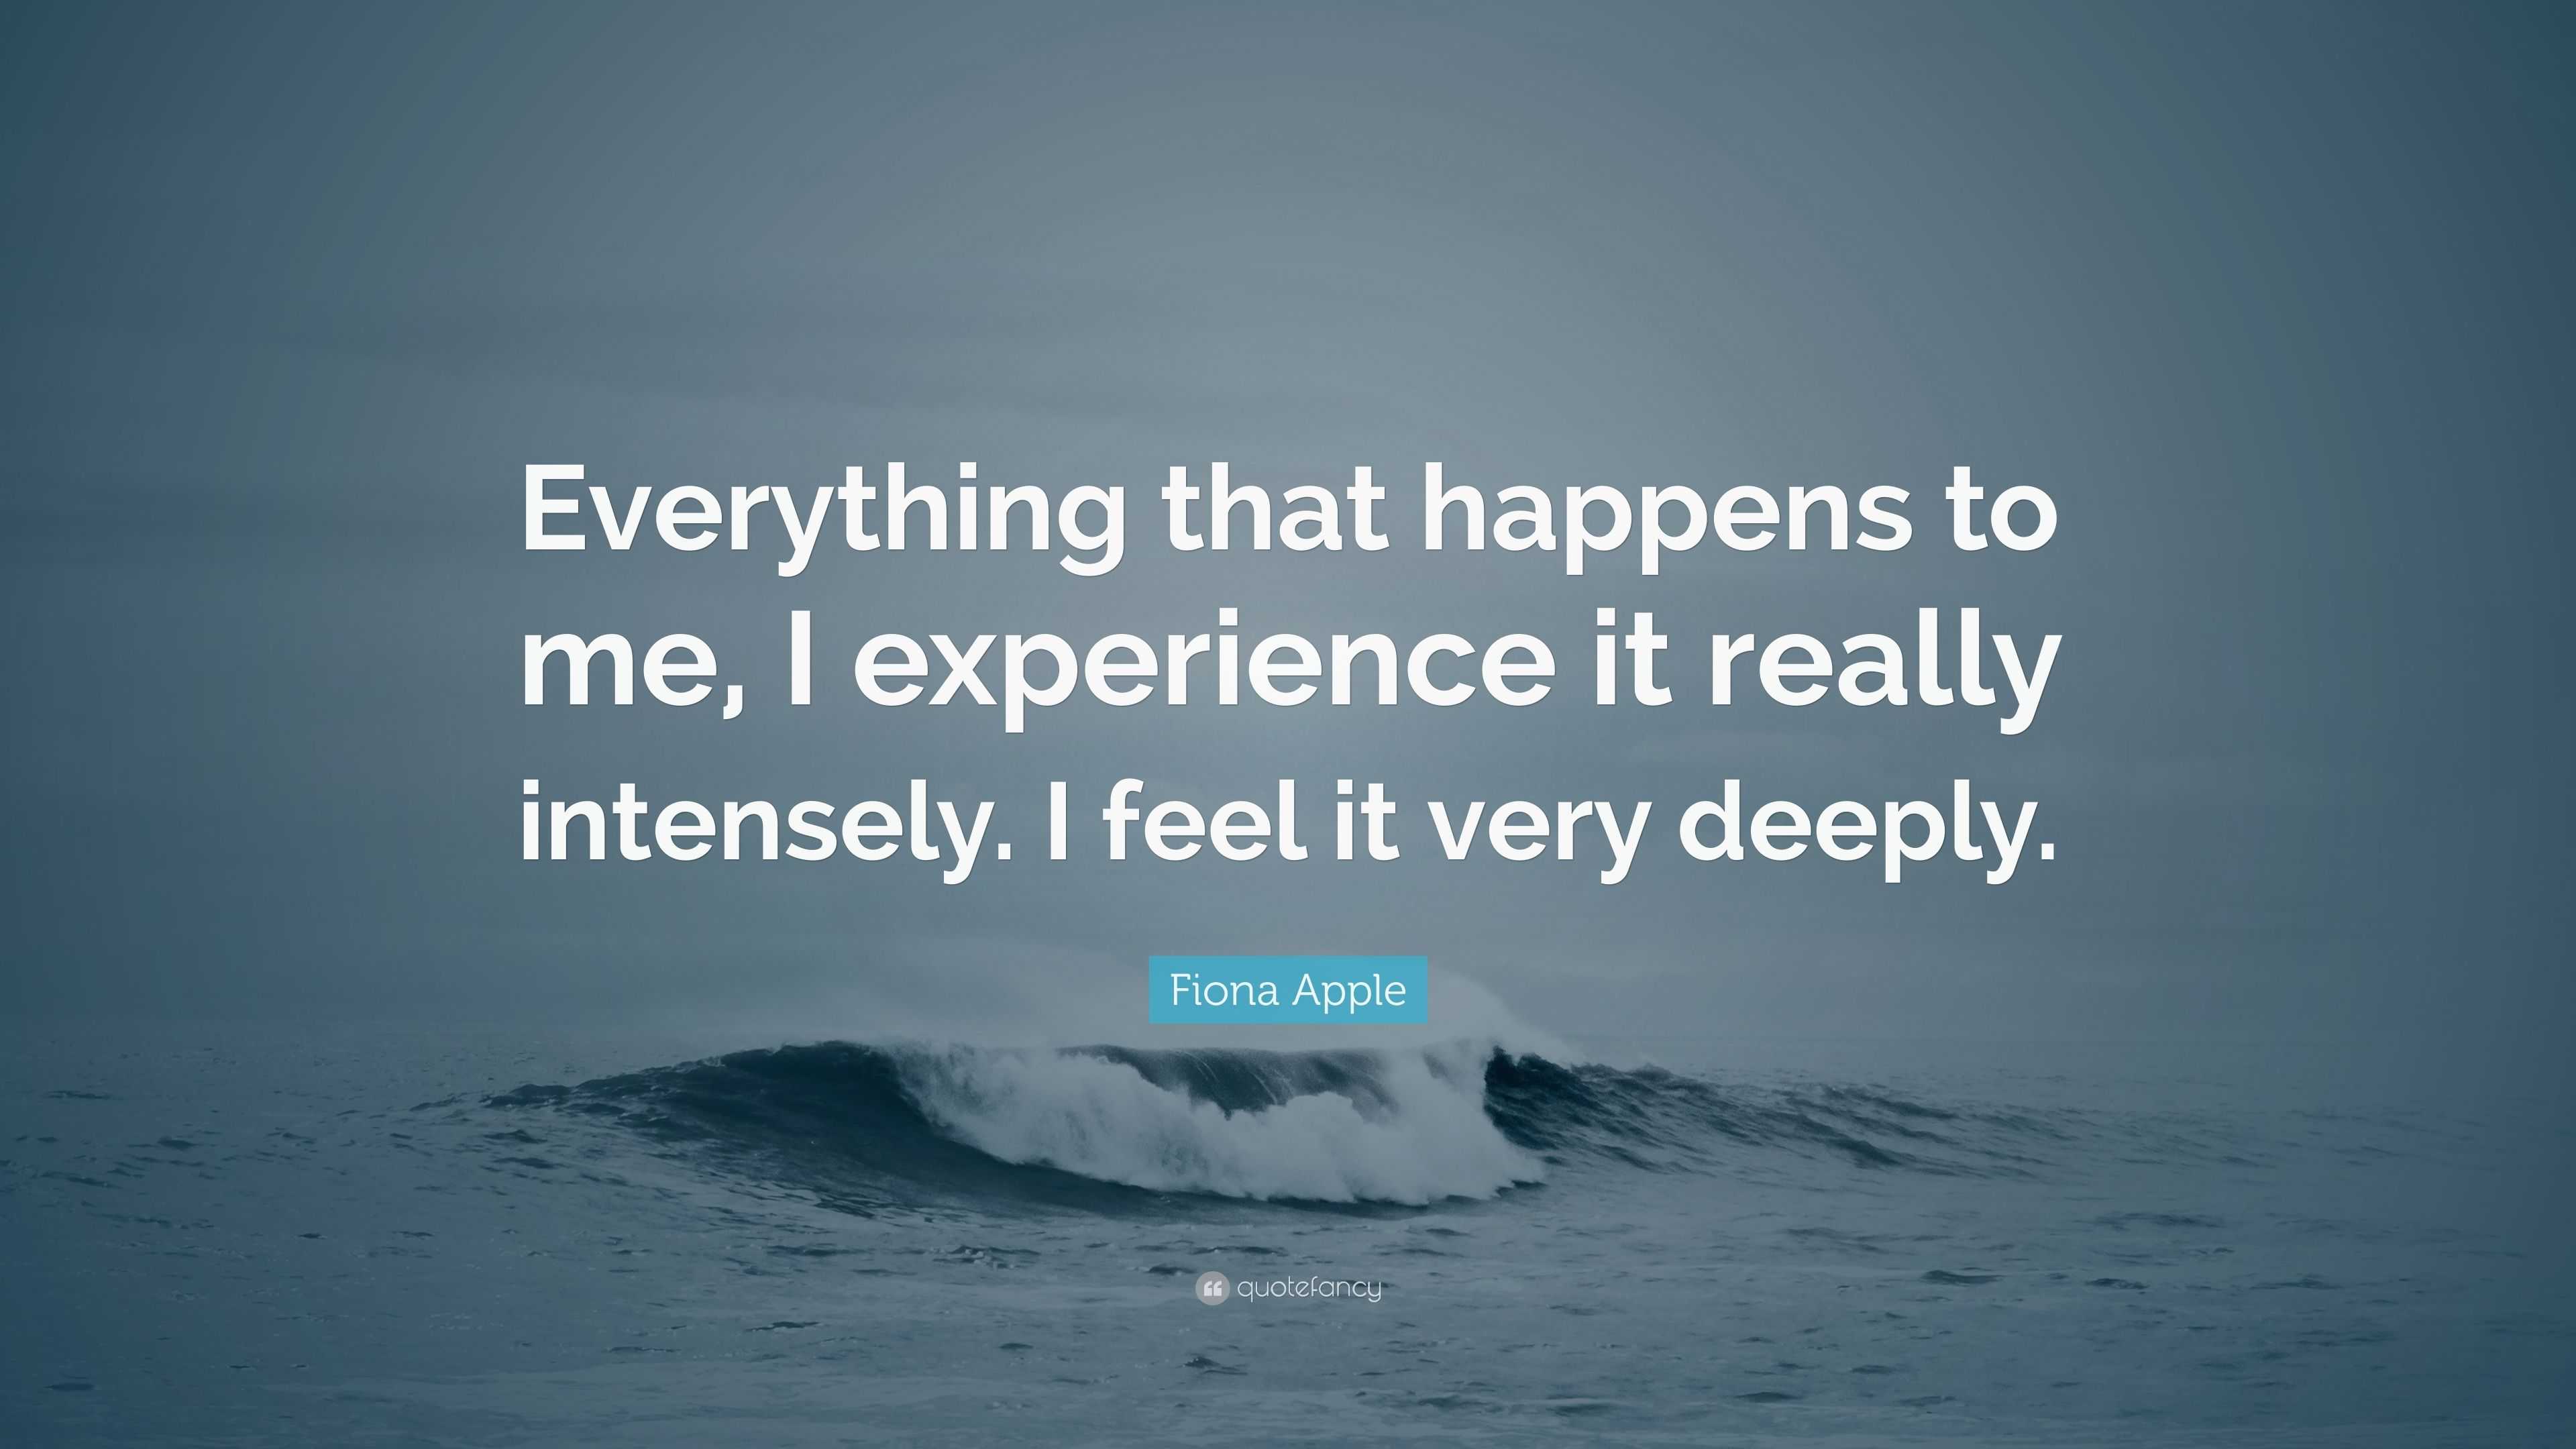 Fiona Apple Quote “Everything that happens to me, I experience it